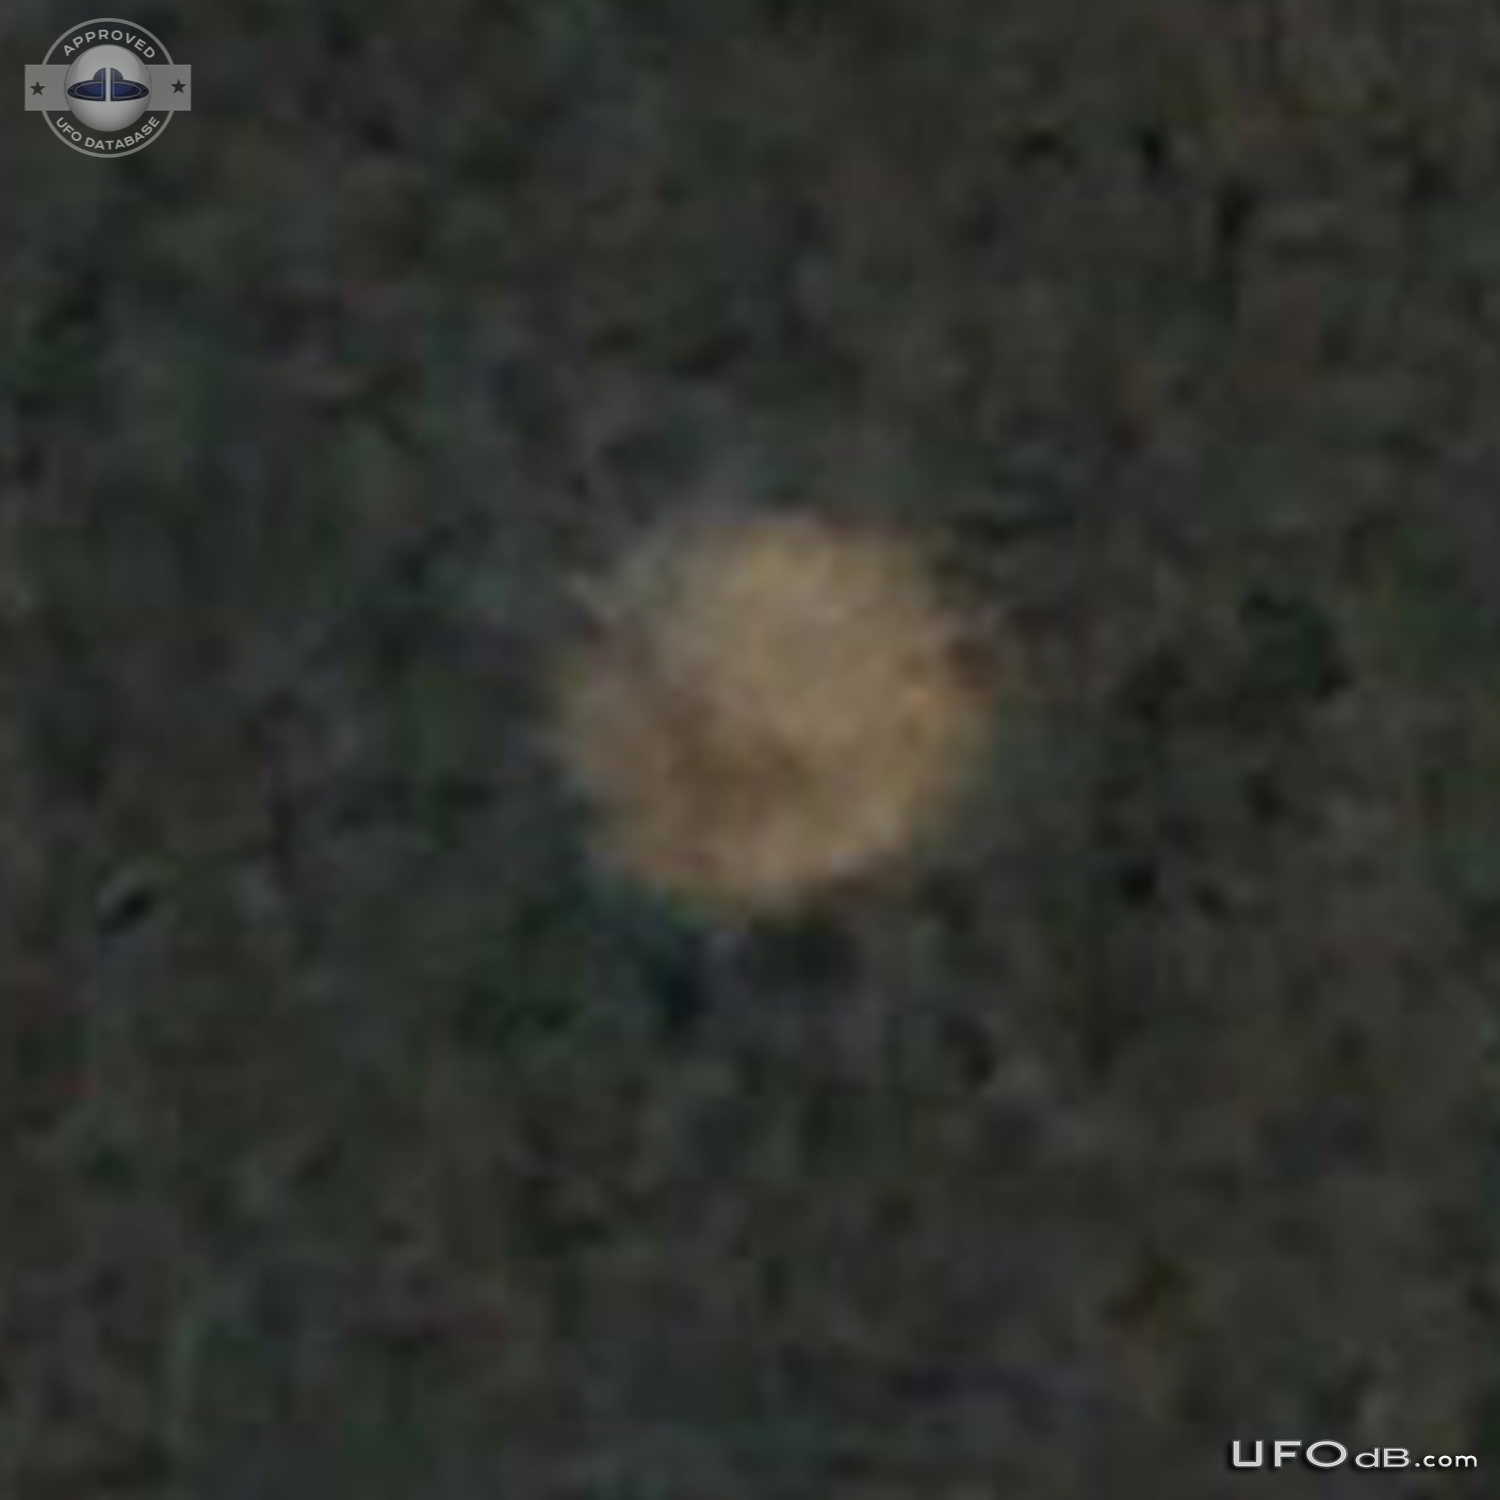 Many hovering UFOs with planes flying around them Weatherford, Texas UFO Picture #619-4